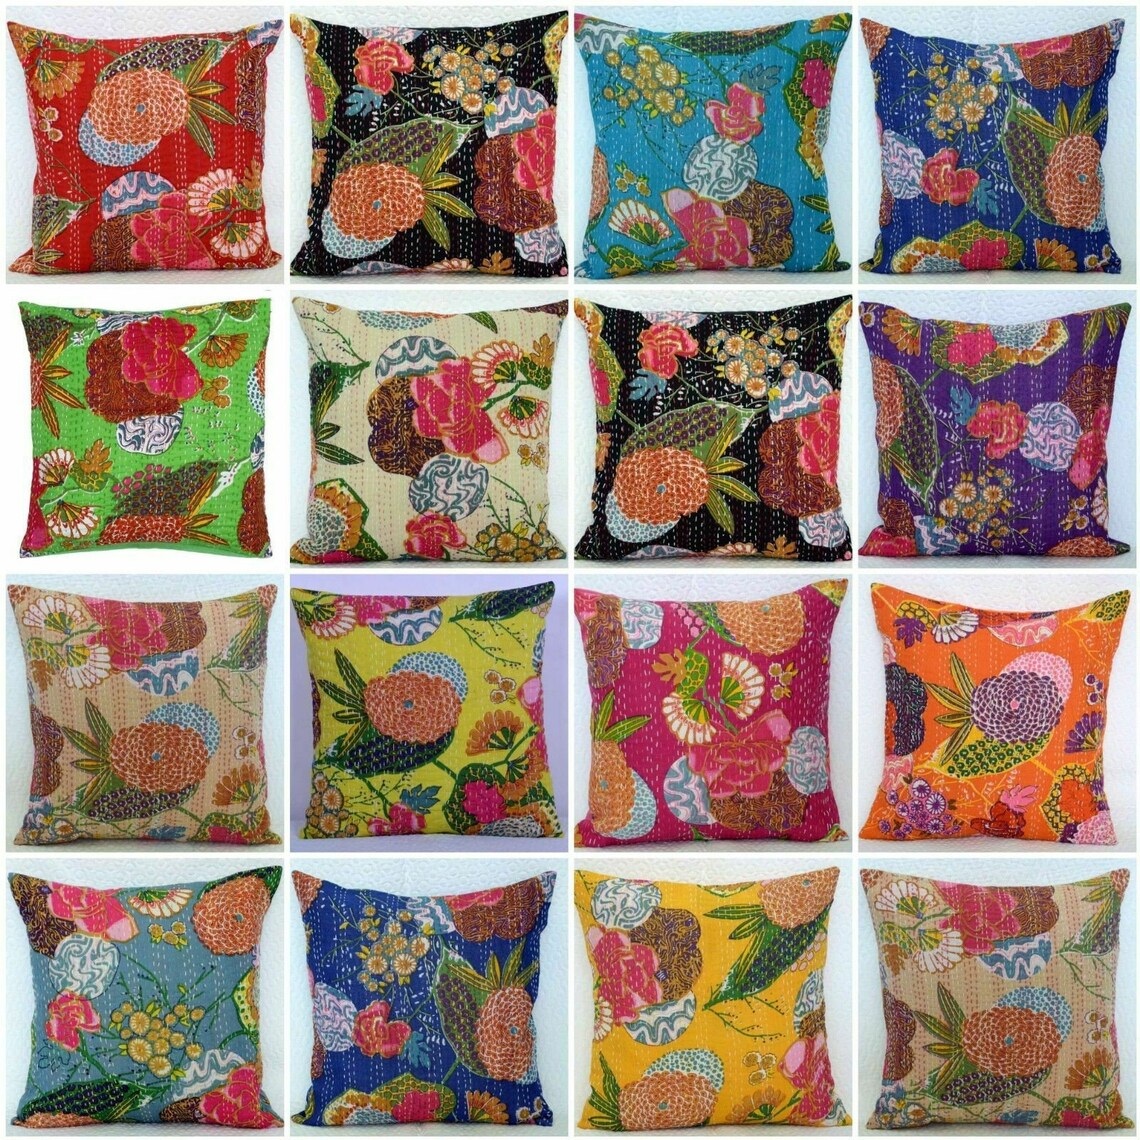 20 PC Lot Indian Kantha Cushion Pillow Cover Decorative Boho Handmade Embroidery 